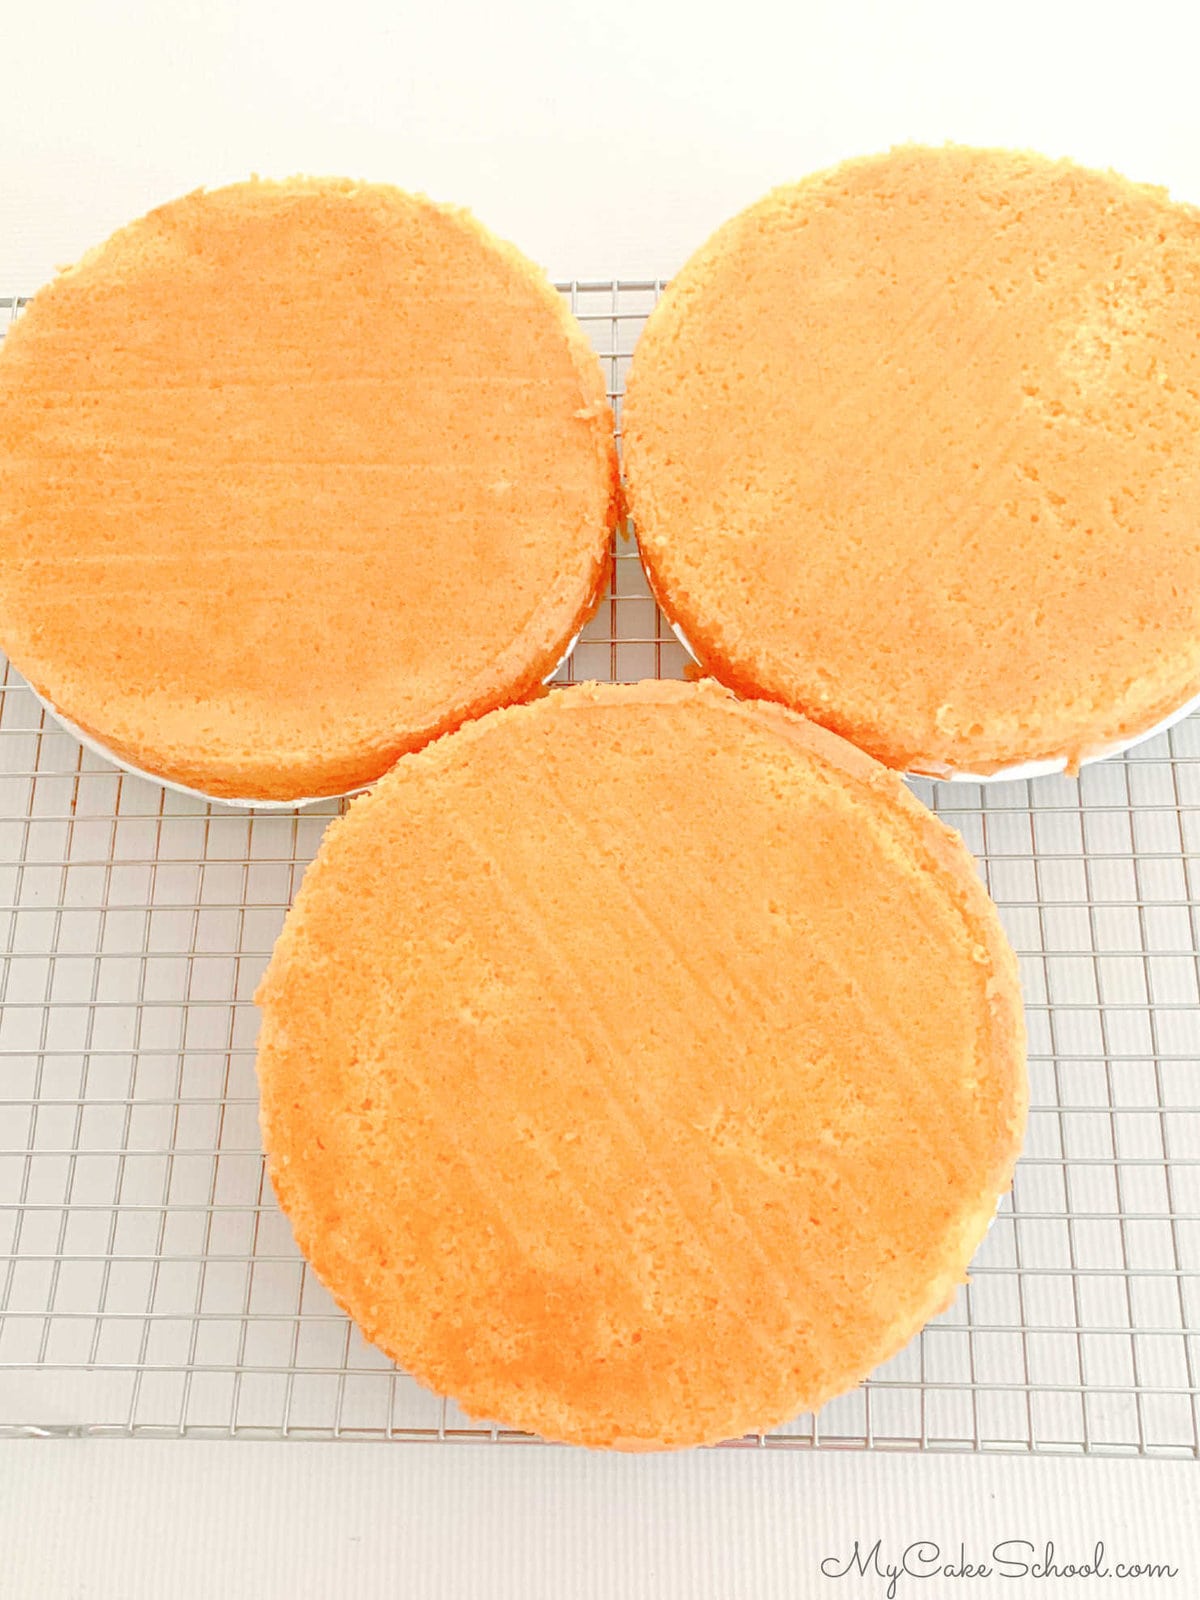 Three freshly baked orange cake layers on a wire rack.